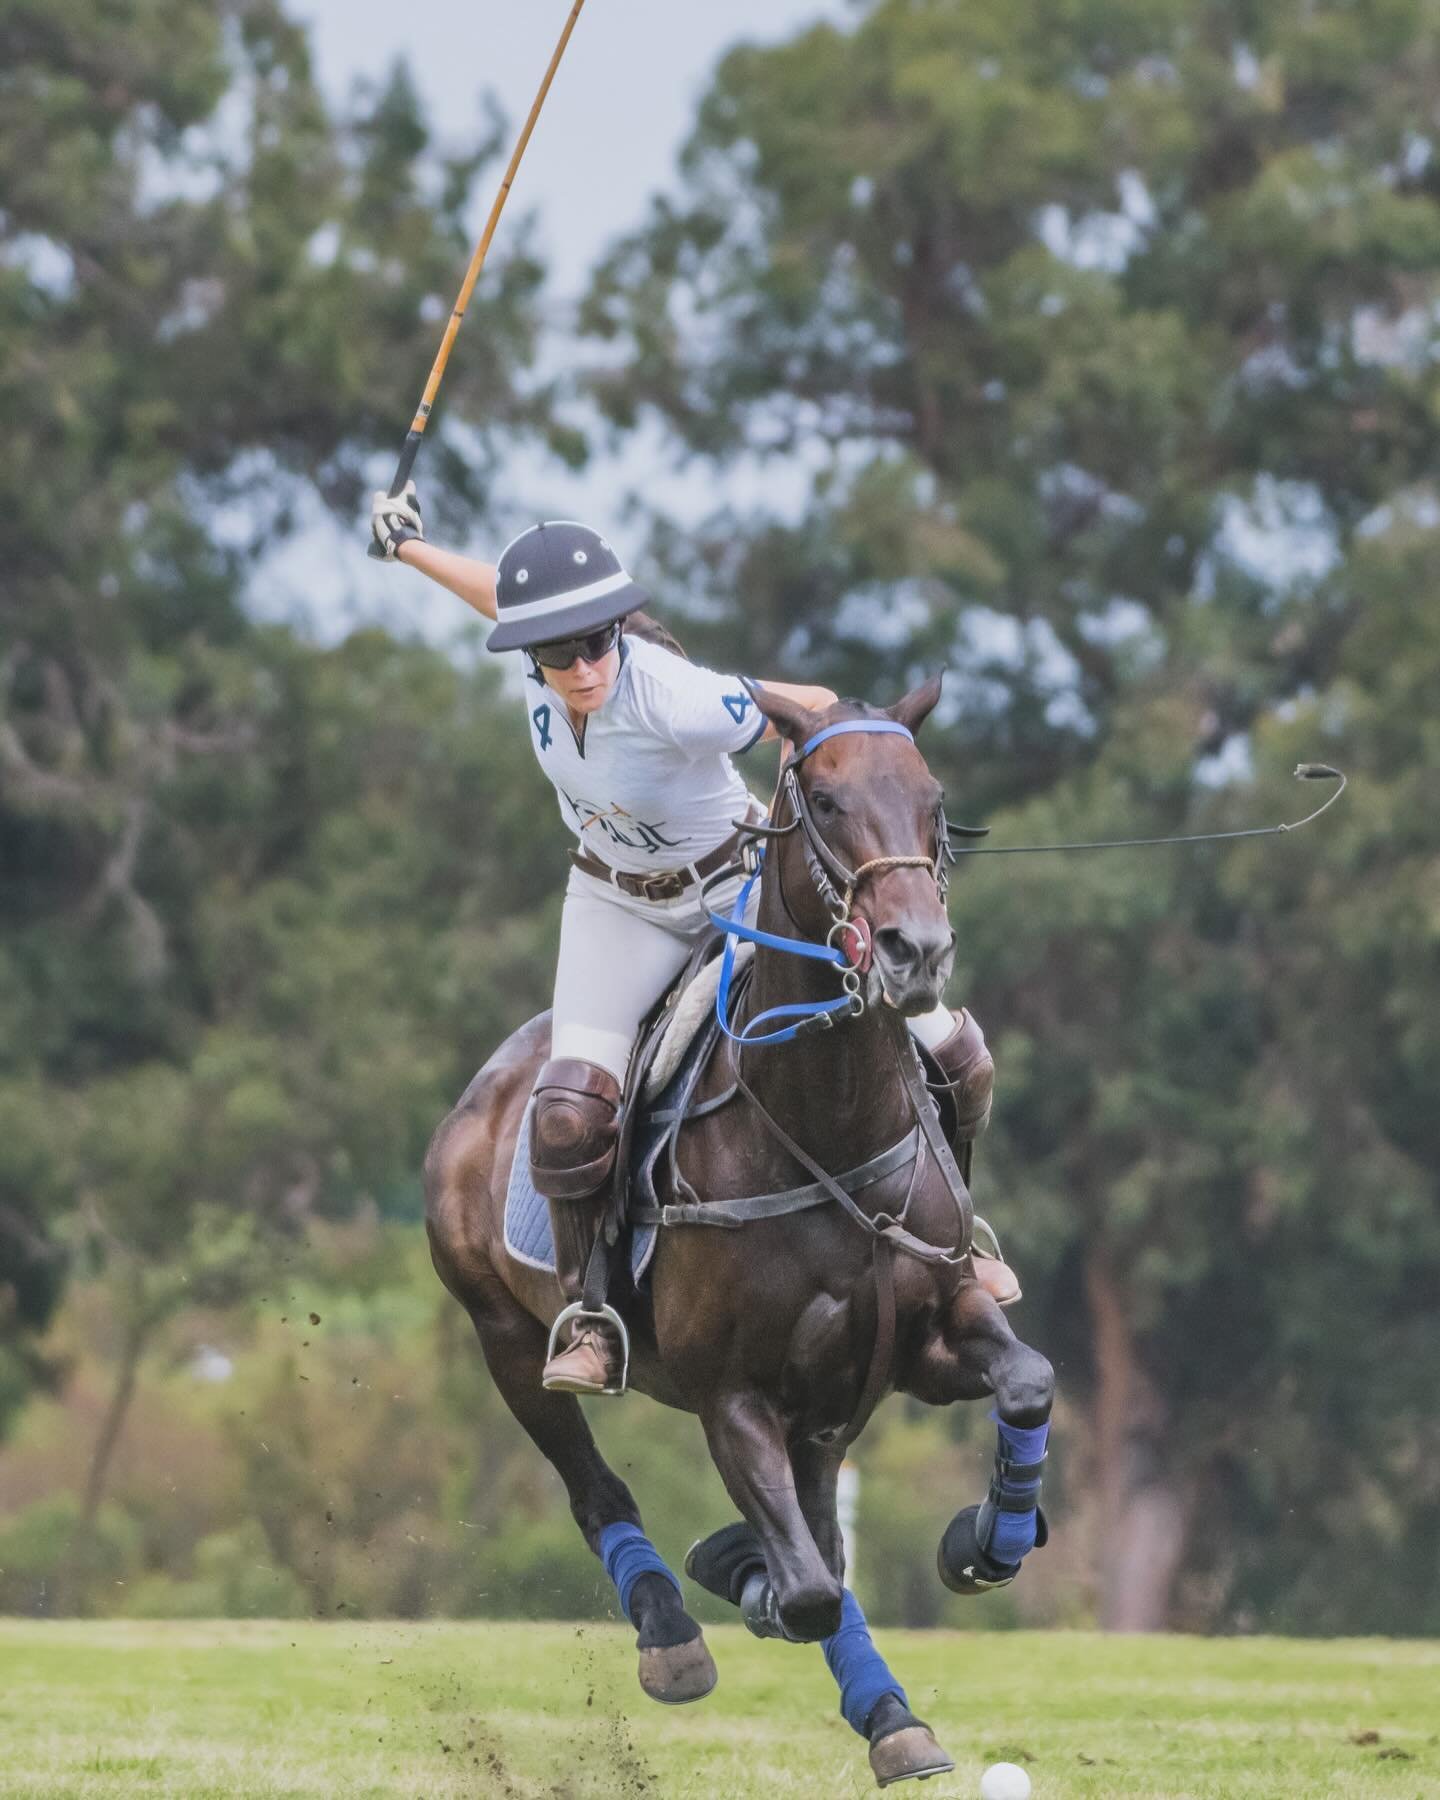 Player Spotlight -

Chloe is an actress, model, and content creator living in Los Angeles. Originally from Pennsylvania, she has been riding horses since she was 6 years old and playing polo since she was 12. She is also an avid competing show jumper